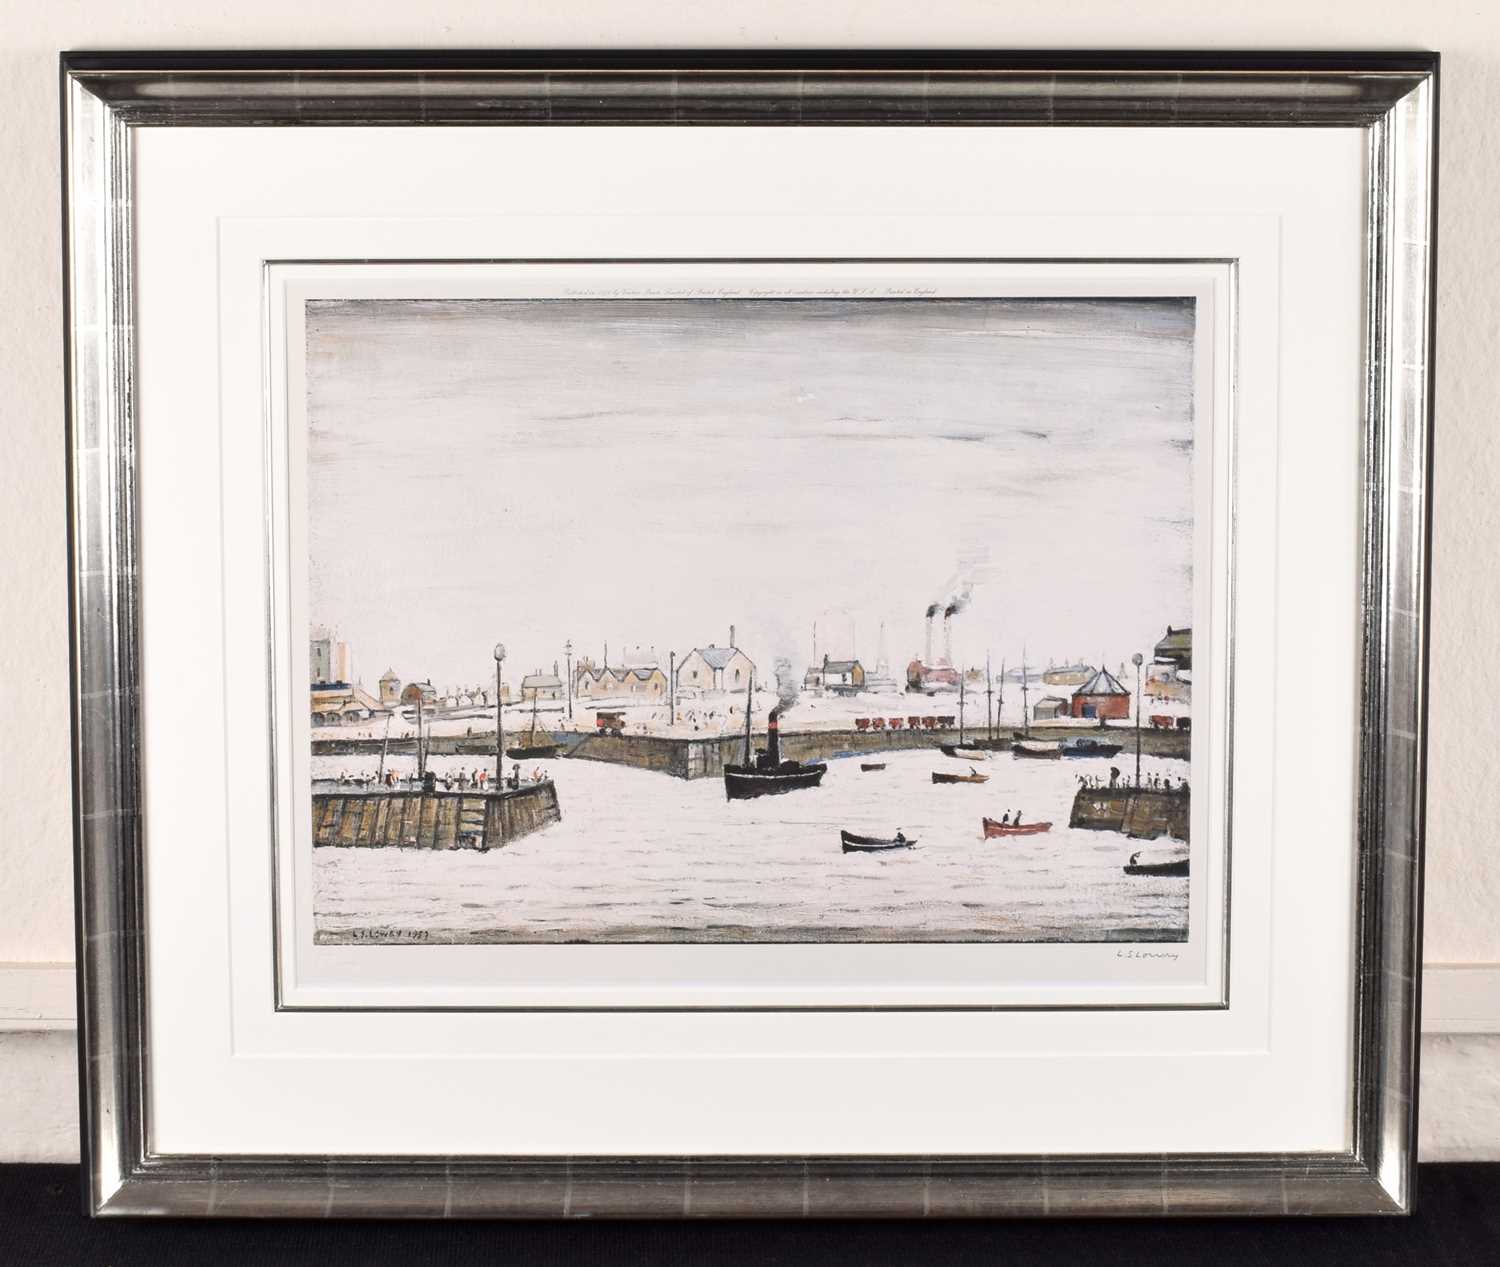 L.S. Lowry R.A. (British 1887-1976) "The Harbour" - Image 2 of 2